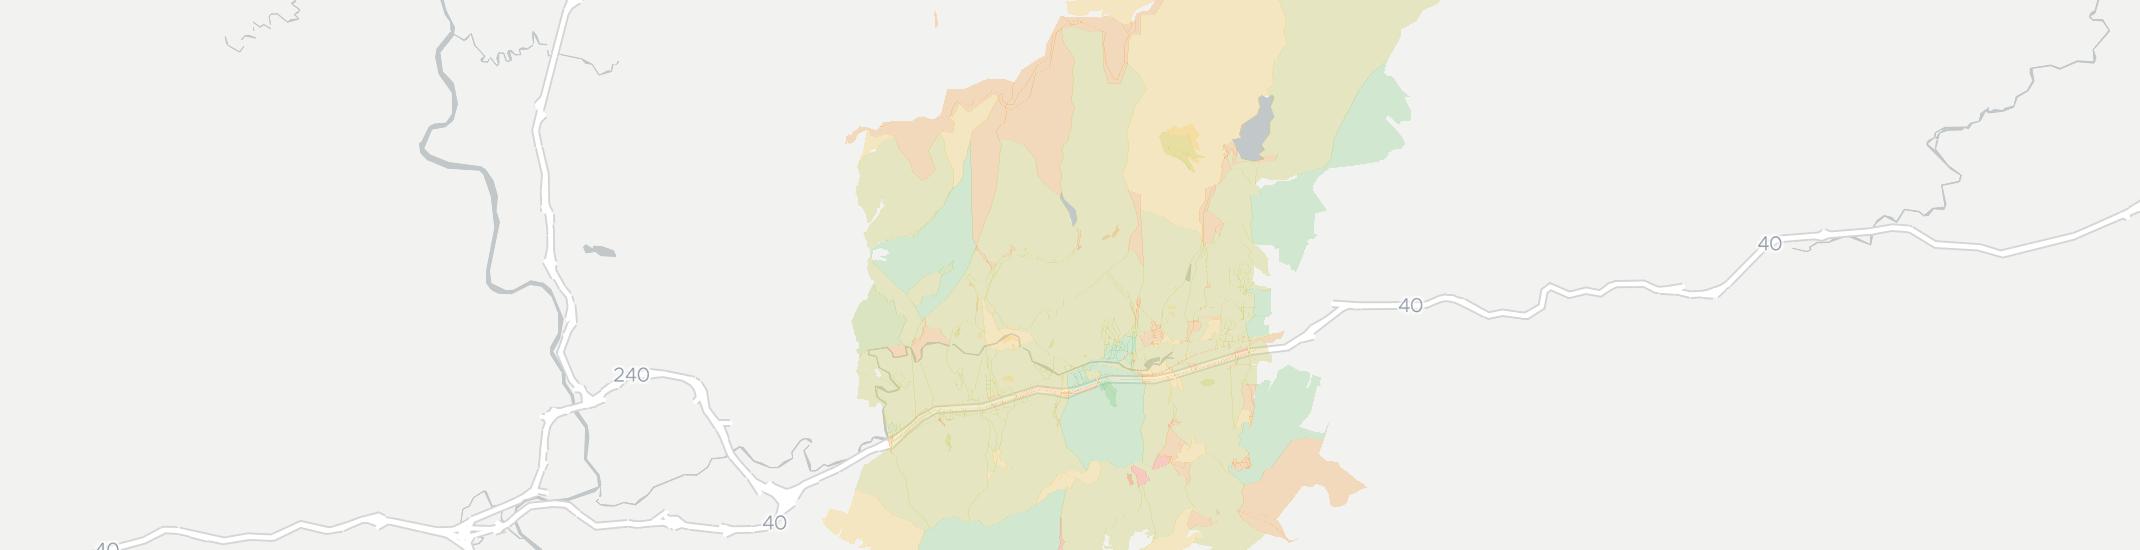 Swannanoa Internet Competition Map. Click for interactive map.